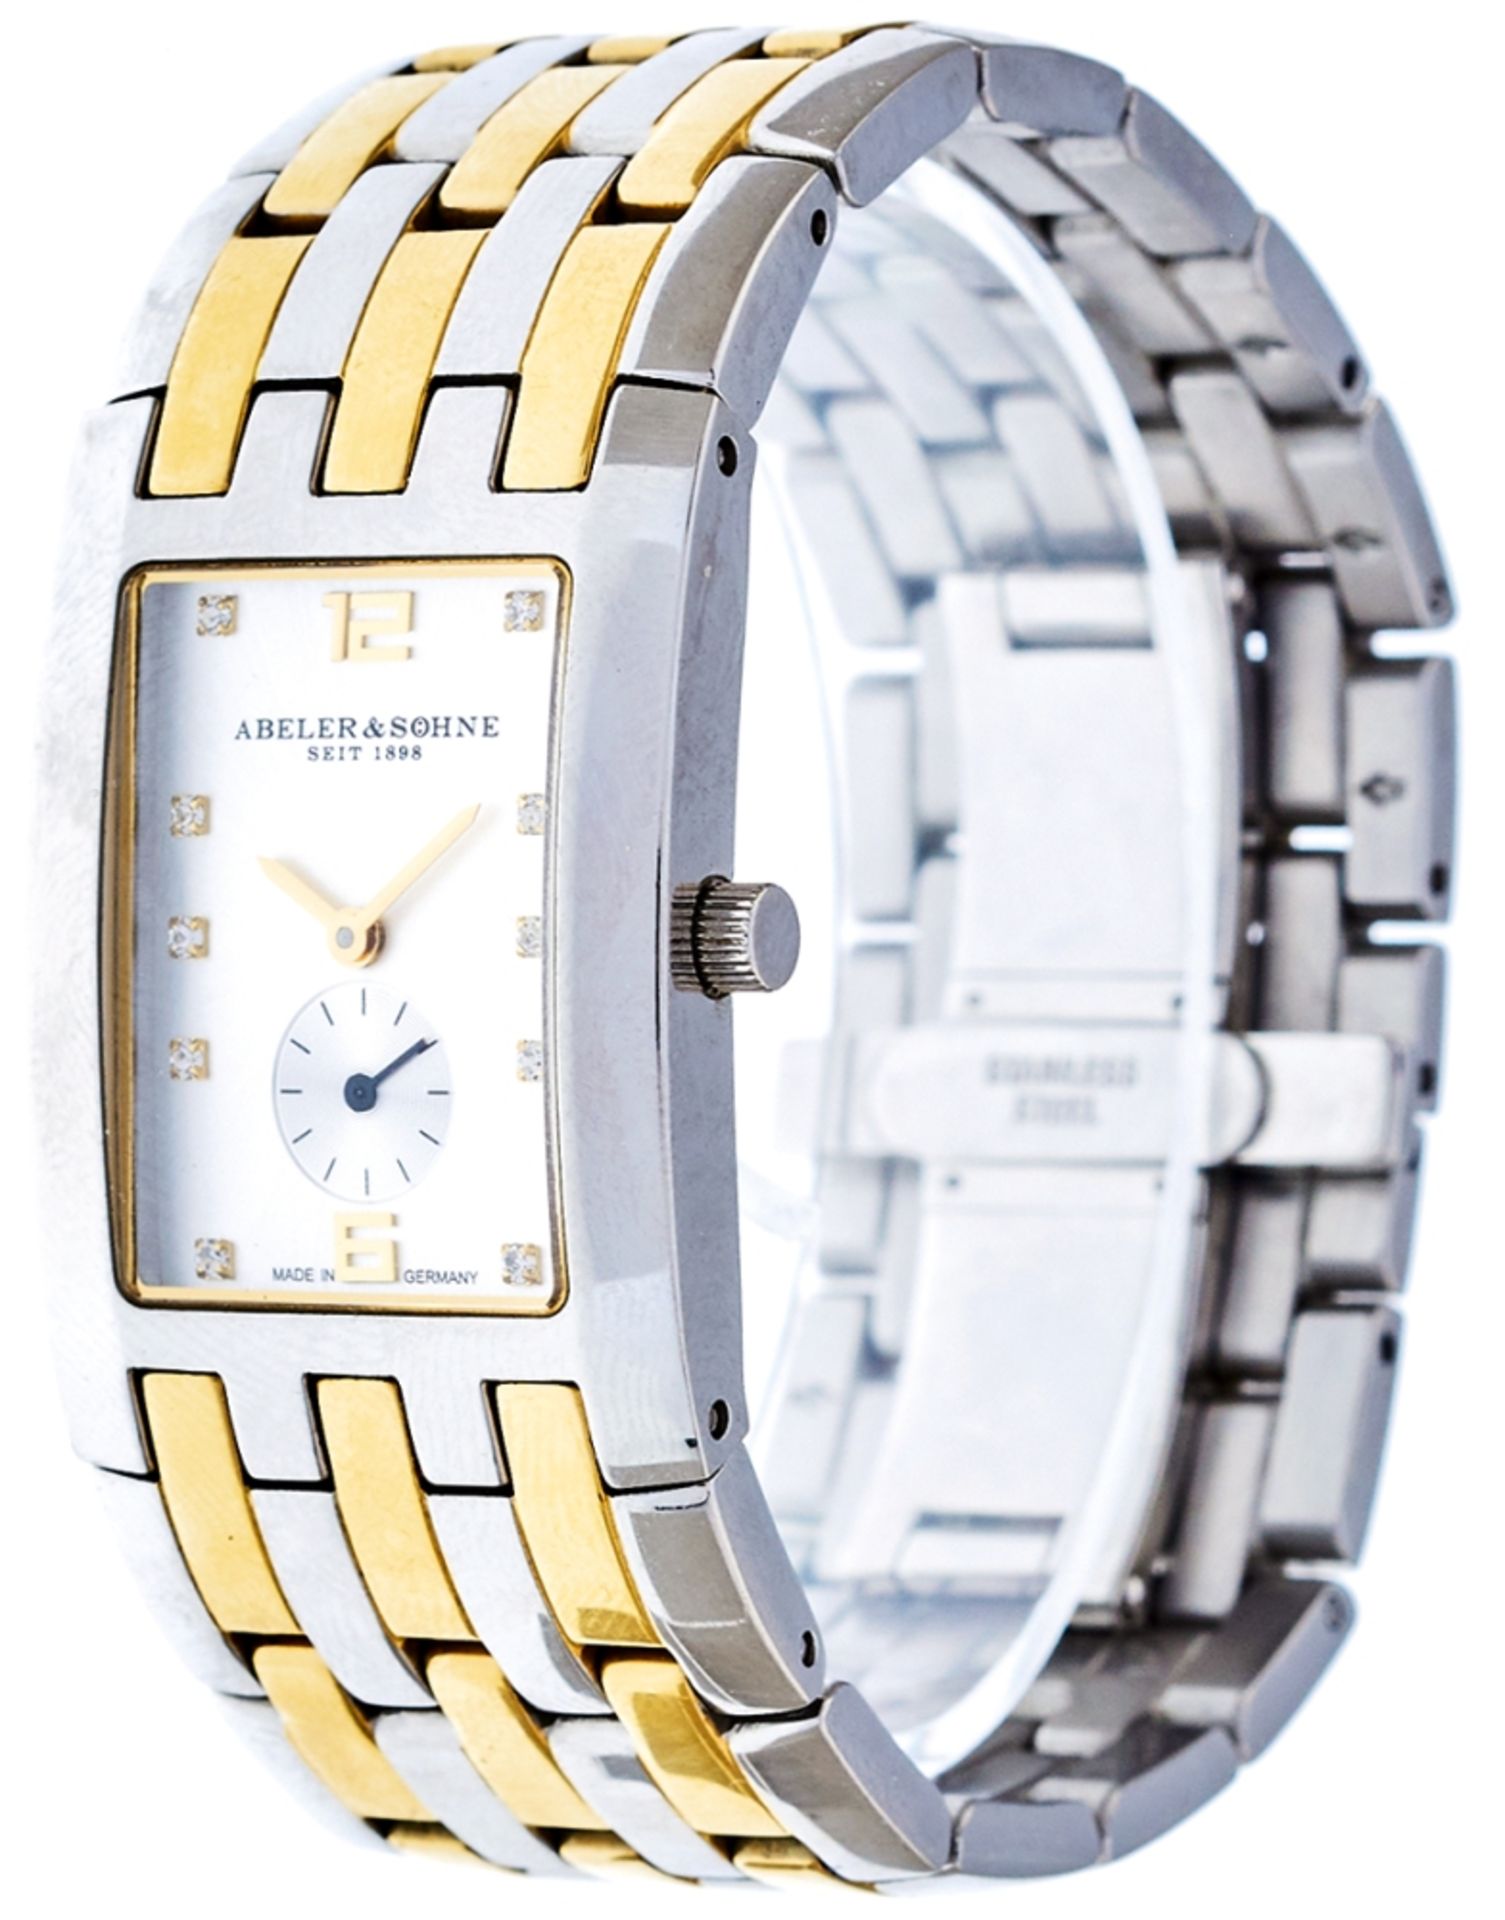 Bicolor womens watch. ABELER & sons since 1898. Model: Elegance. Reference number: AS3138. Model